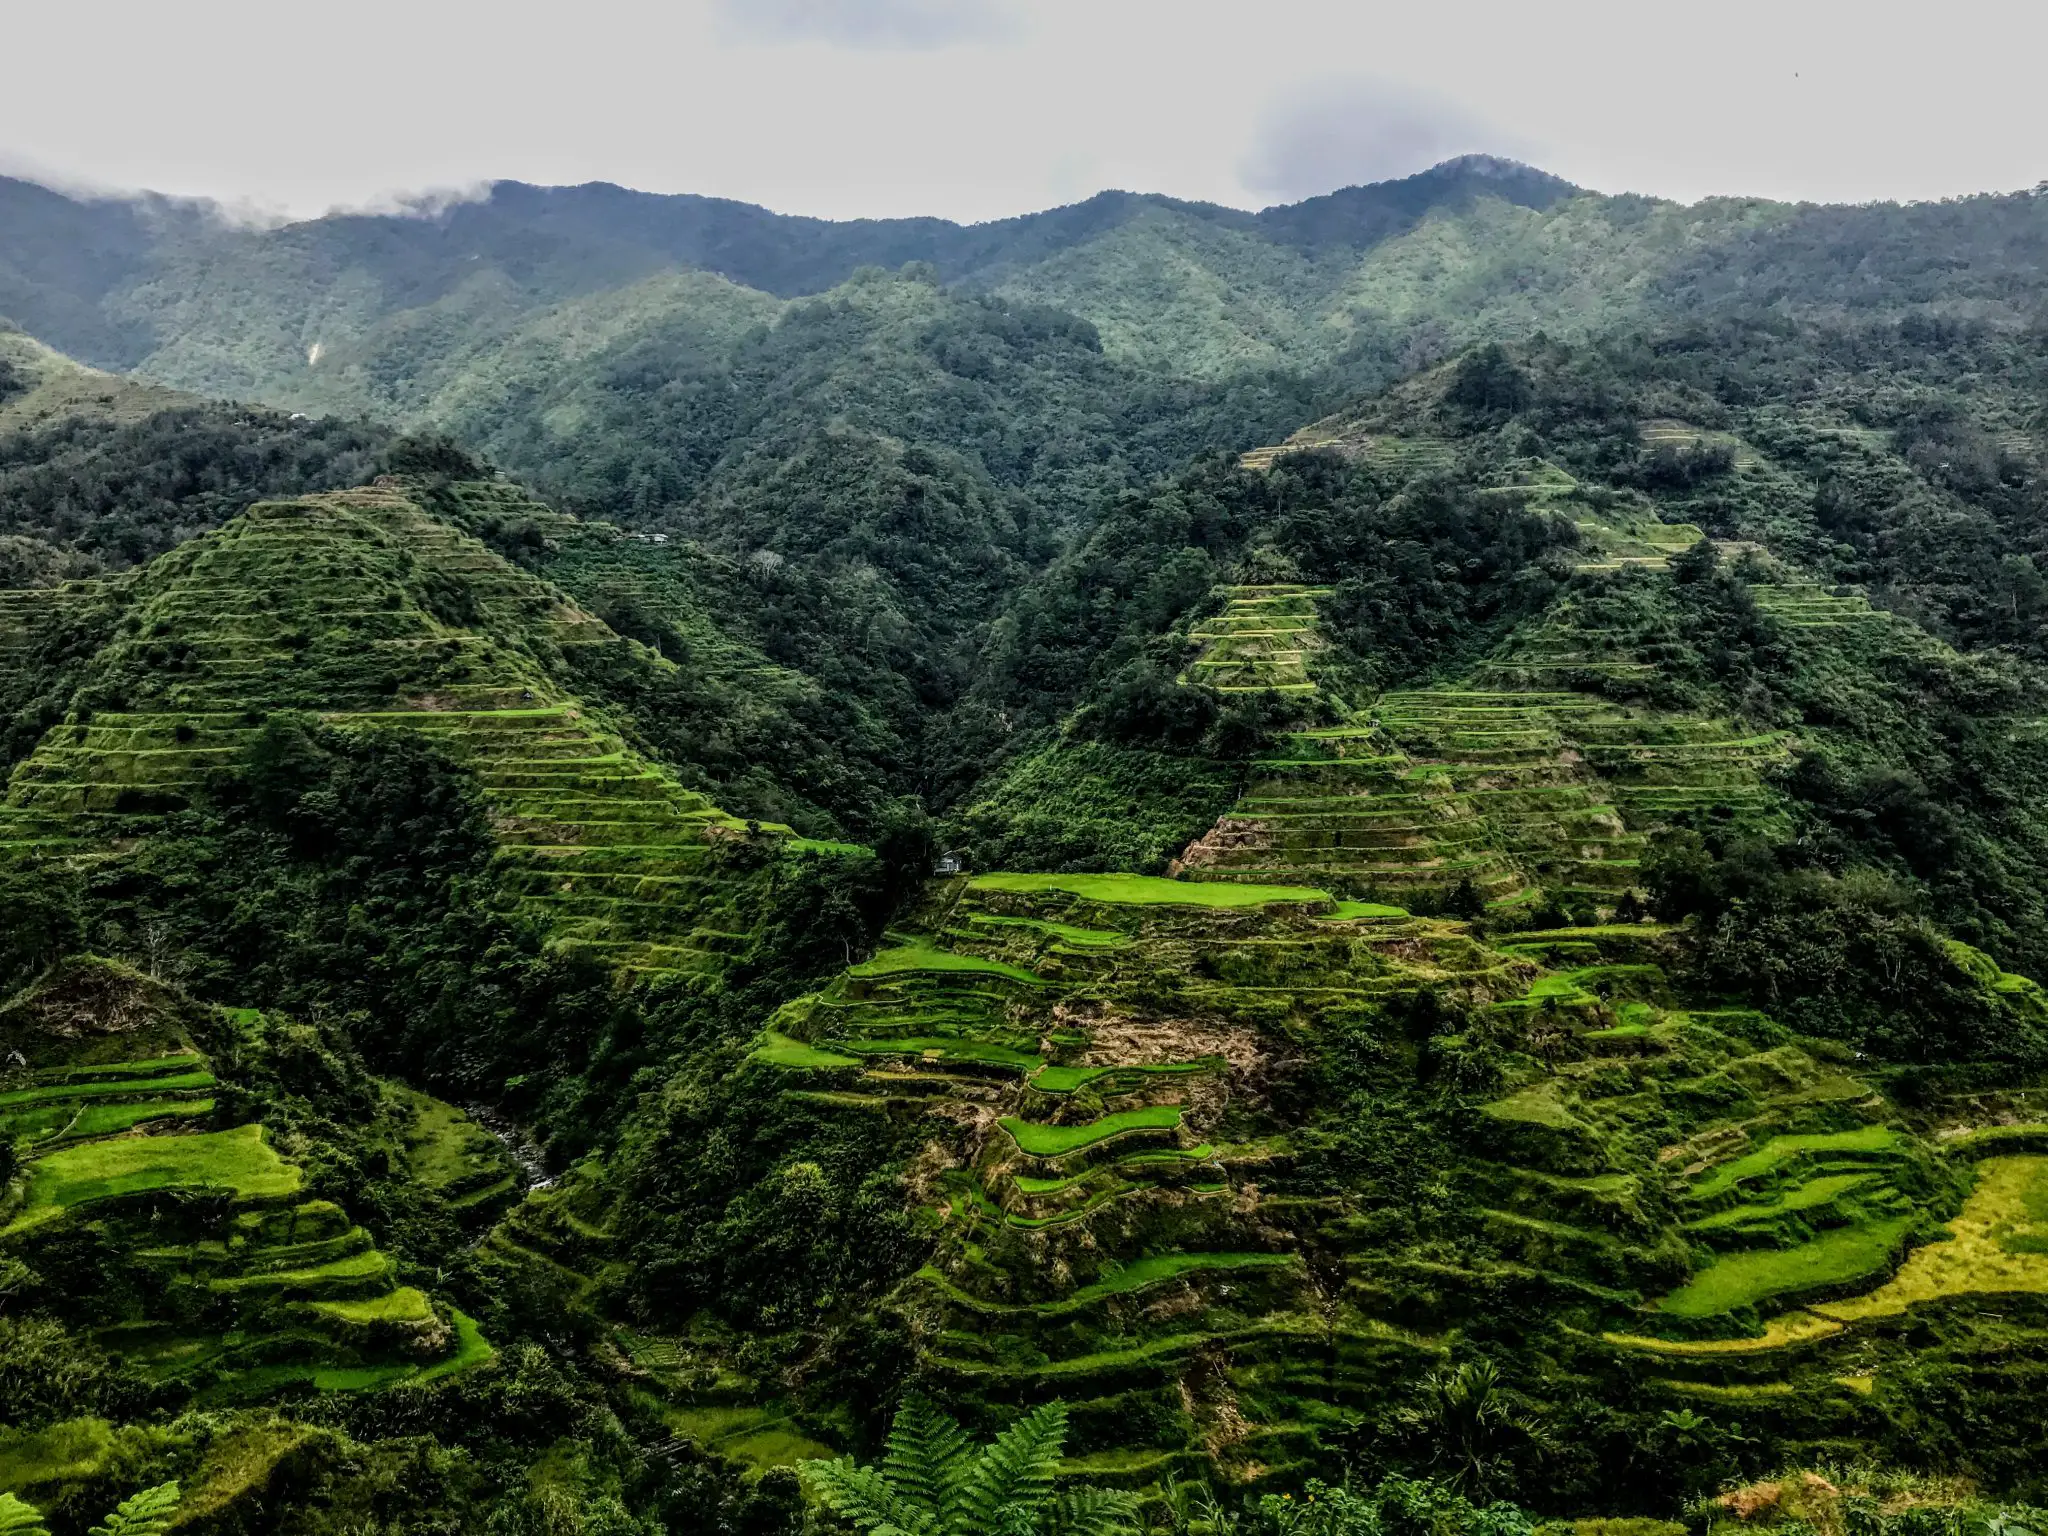 The cheapest and easiest way to see Philippines Ifugao rice terraces